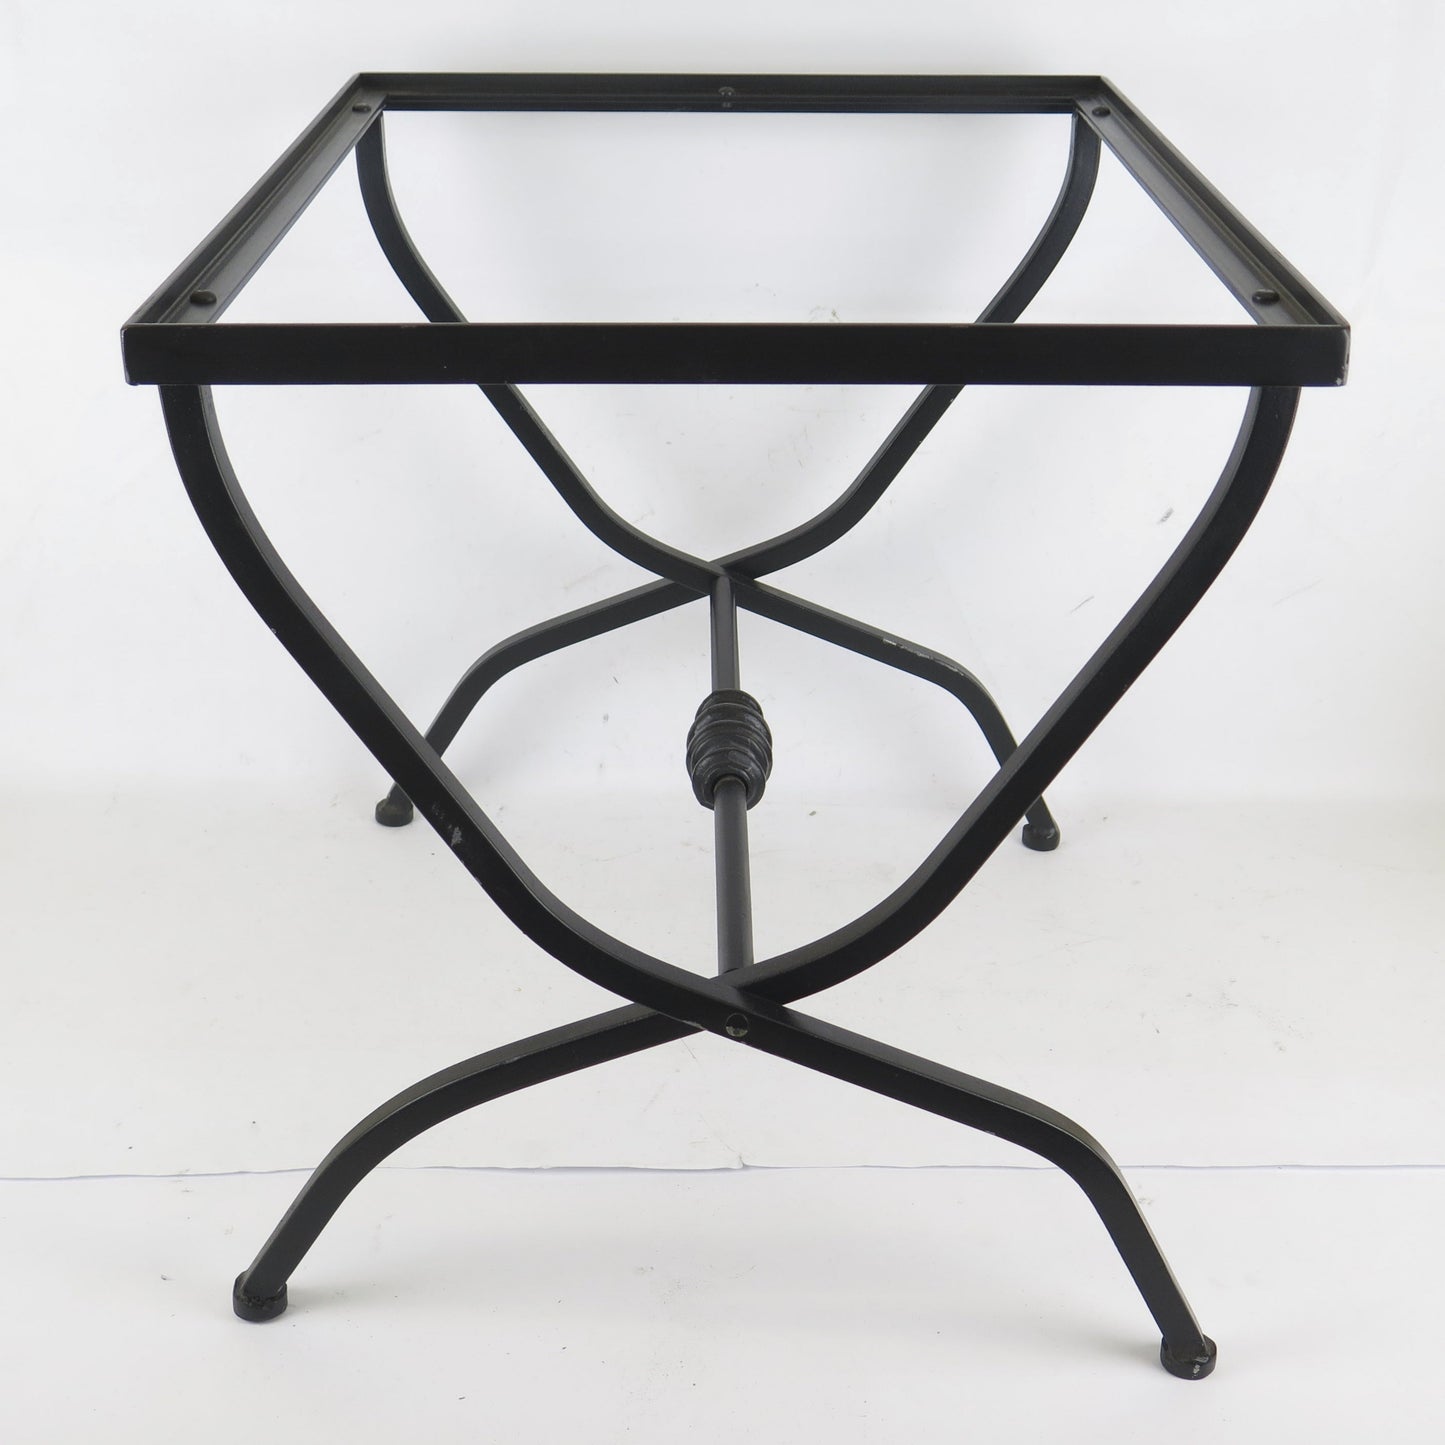 HIGH QUALITY HAND FORGED WROUGHT IRON TABLE VINTAGE LOW RECTANGULAR CH